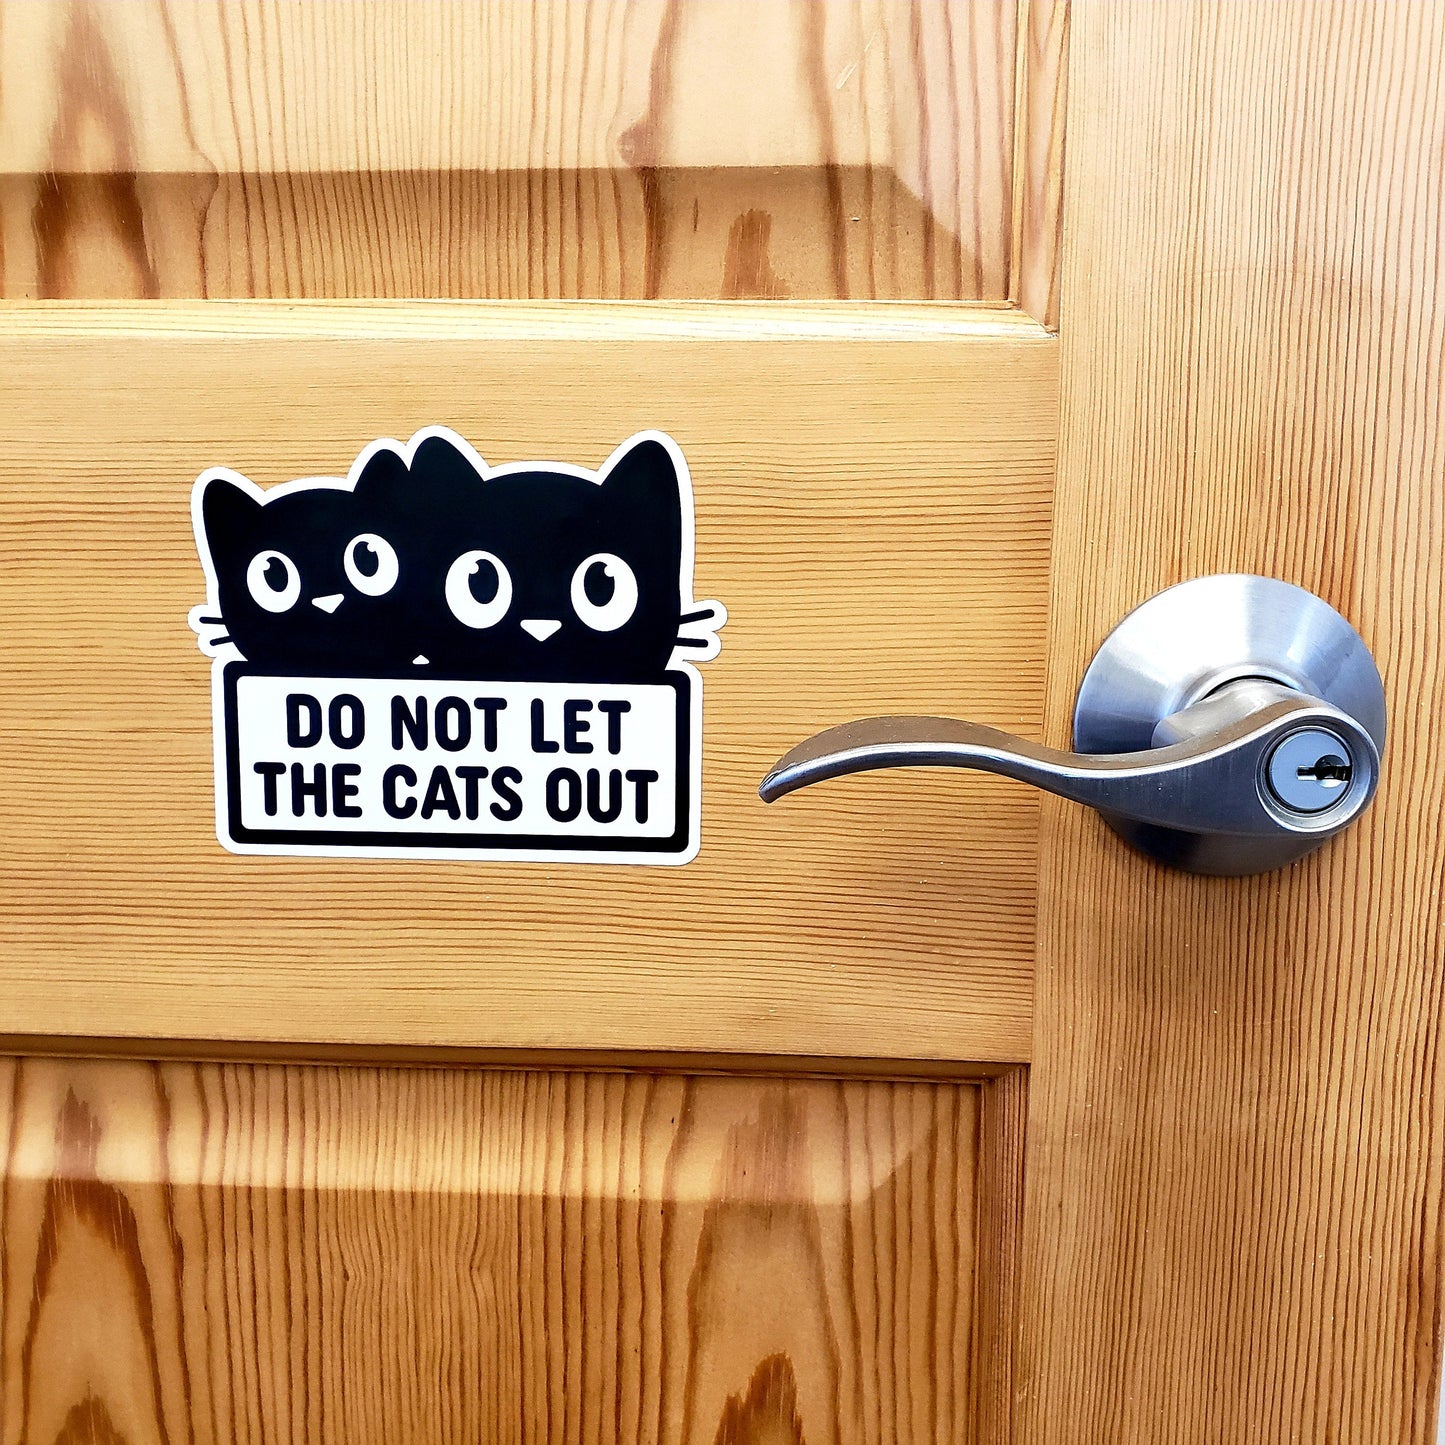 Do Not Let the Cats Out Sticker, black and white vinyl decal sticker, safe pet sign, gift for cat lover, indoor cats household, waterproof.